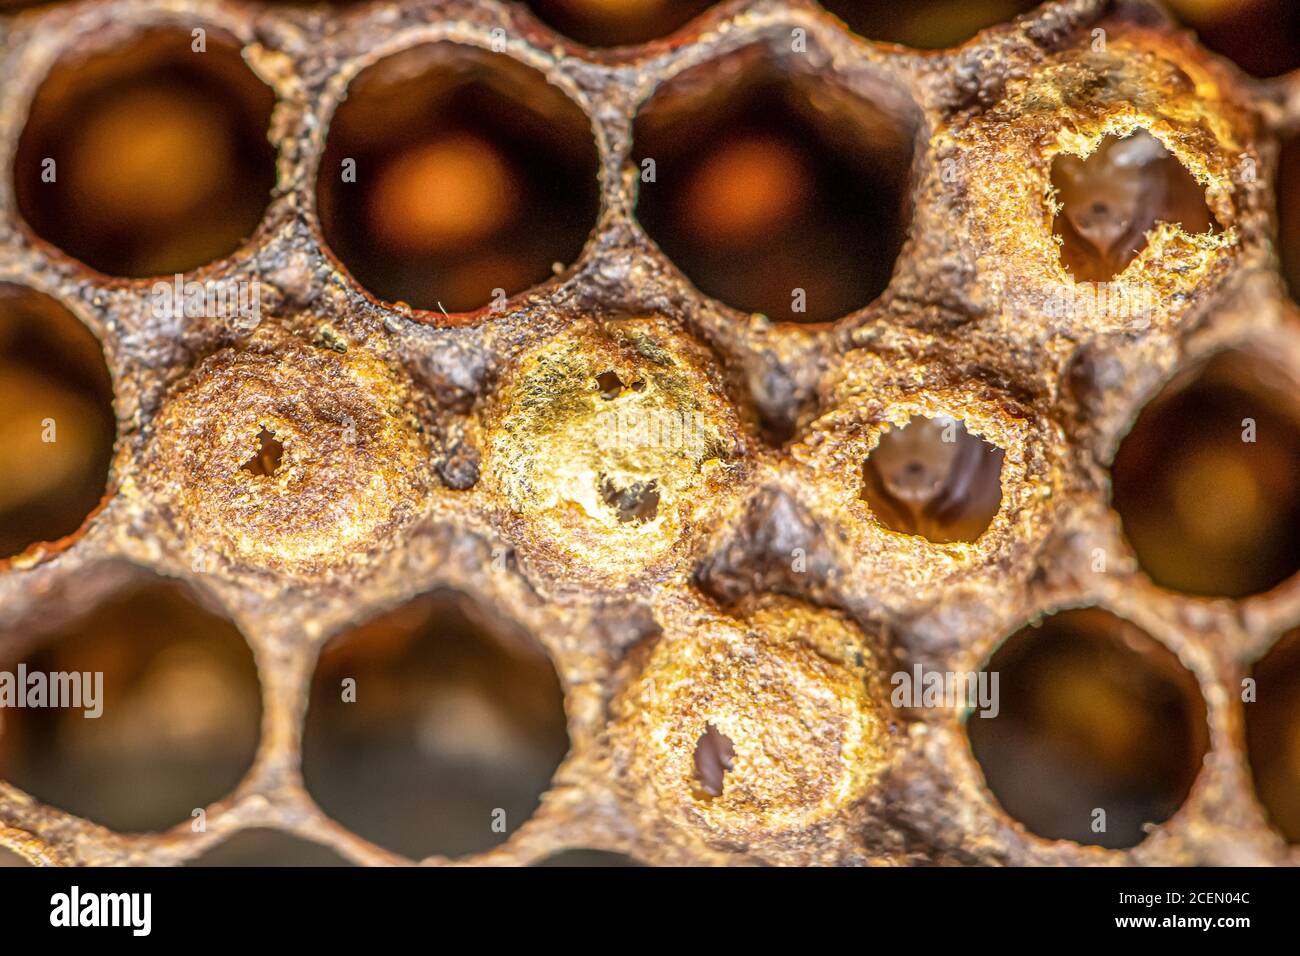 Sealed brood of Honey bees in the apiary of beekeeper in the hive Nurse bees on the frame with the beeswax and propolis colony. Stock Photo